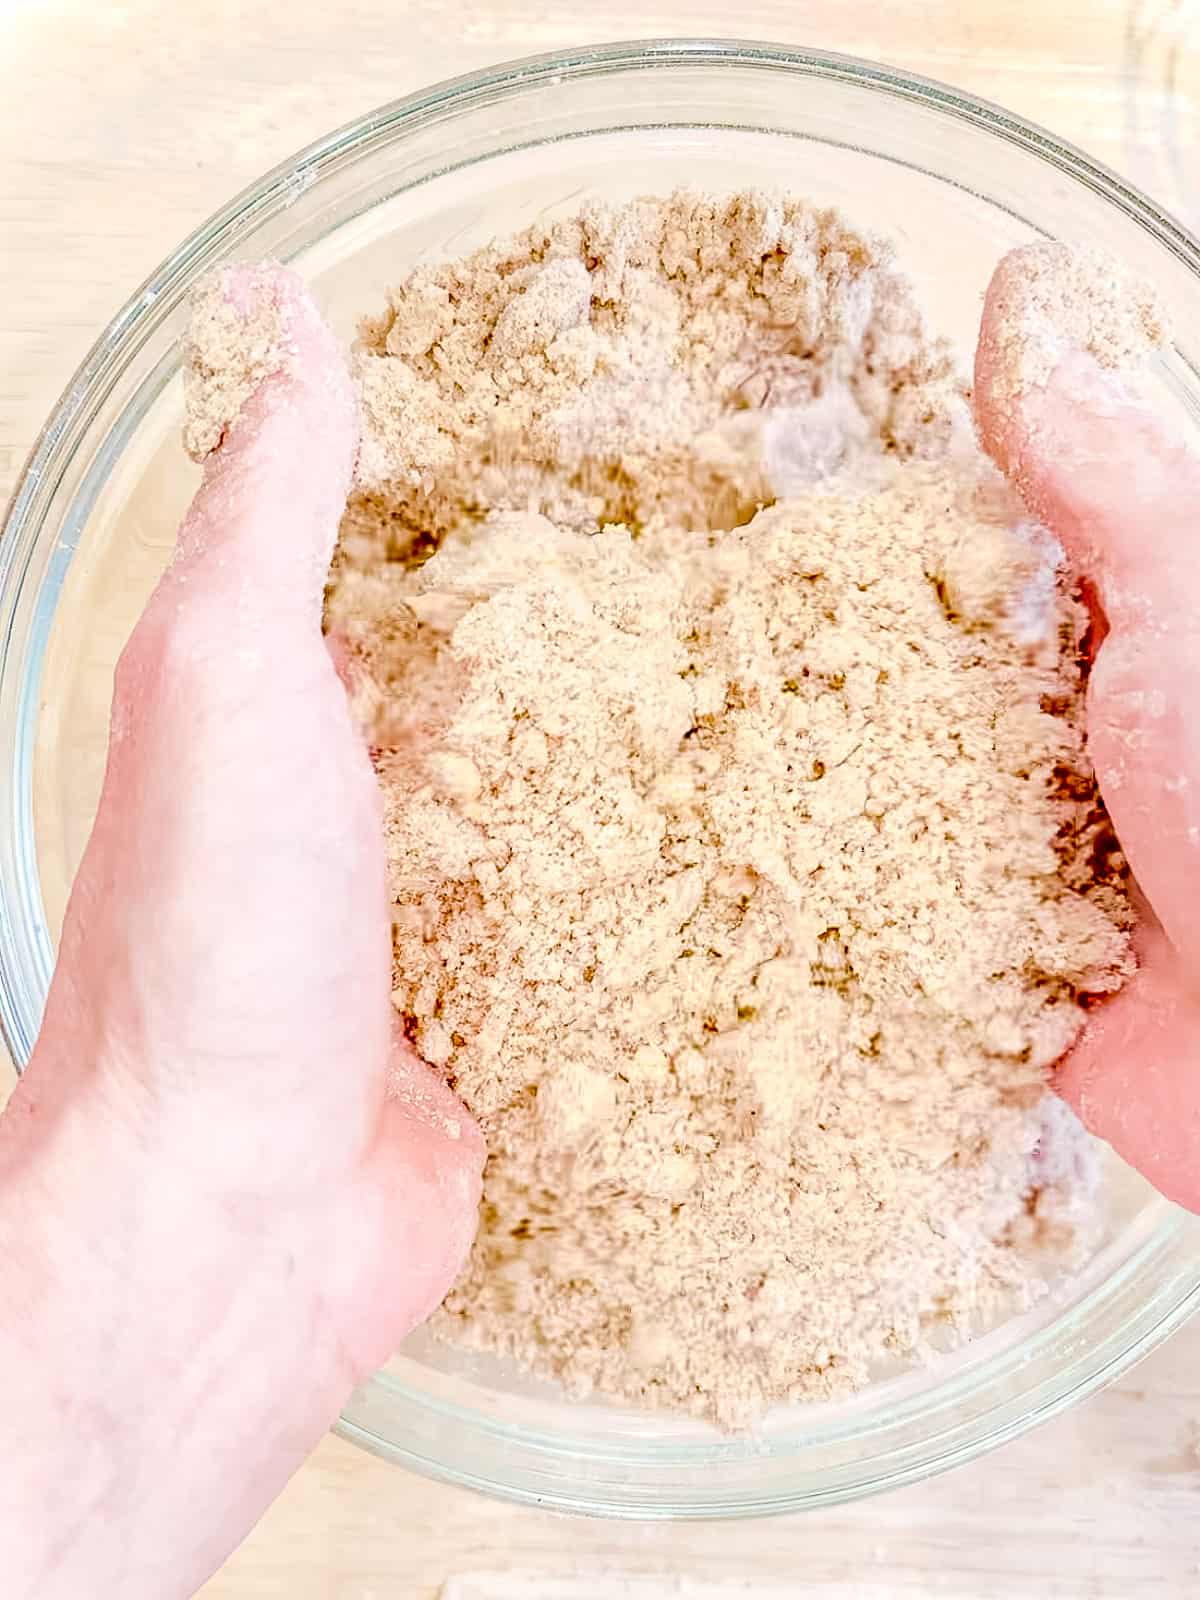 Properly mixed streusel with small and large chunks.